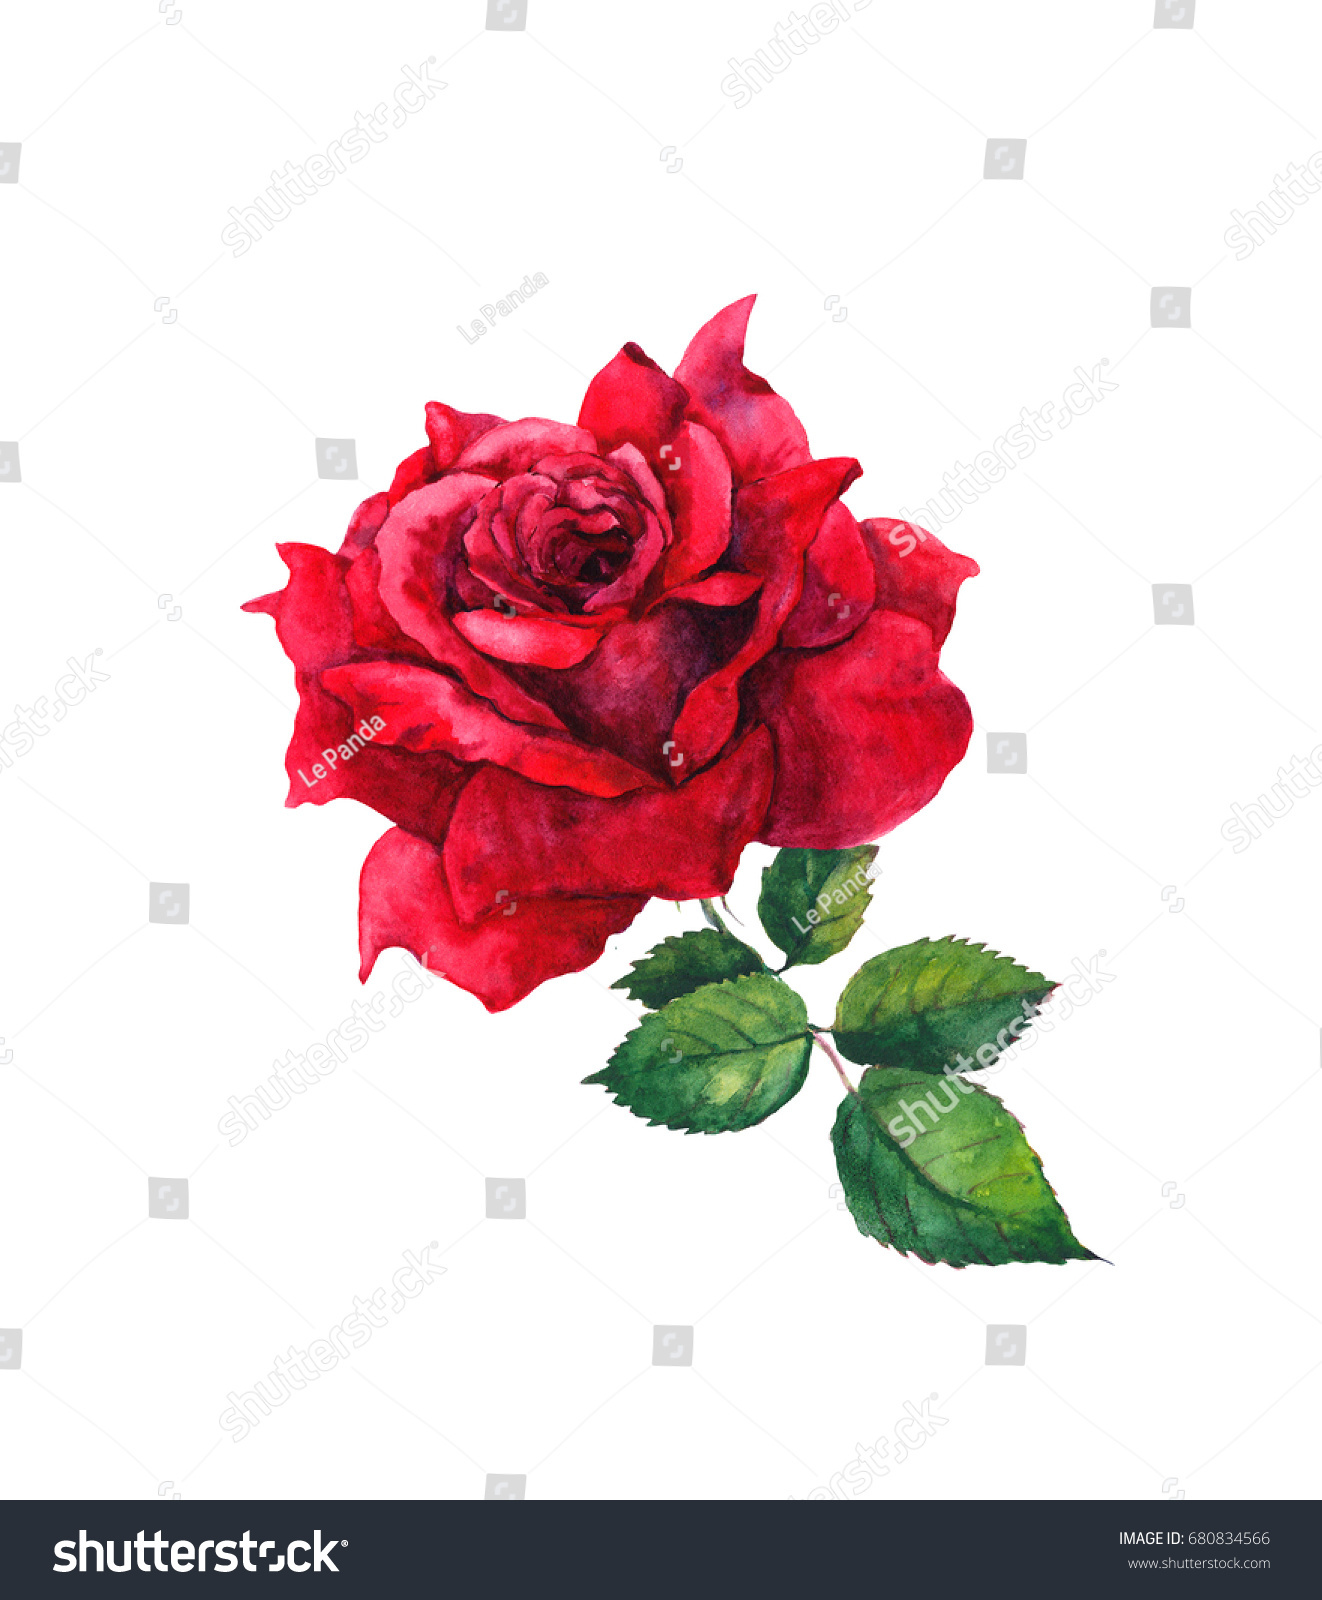 One Red Rose Flower Isolated Watercolor Stock Illustration 680834566